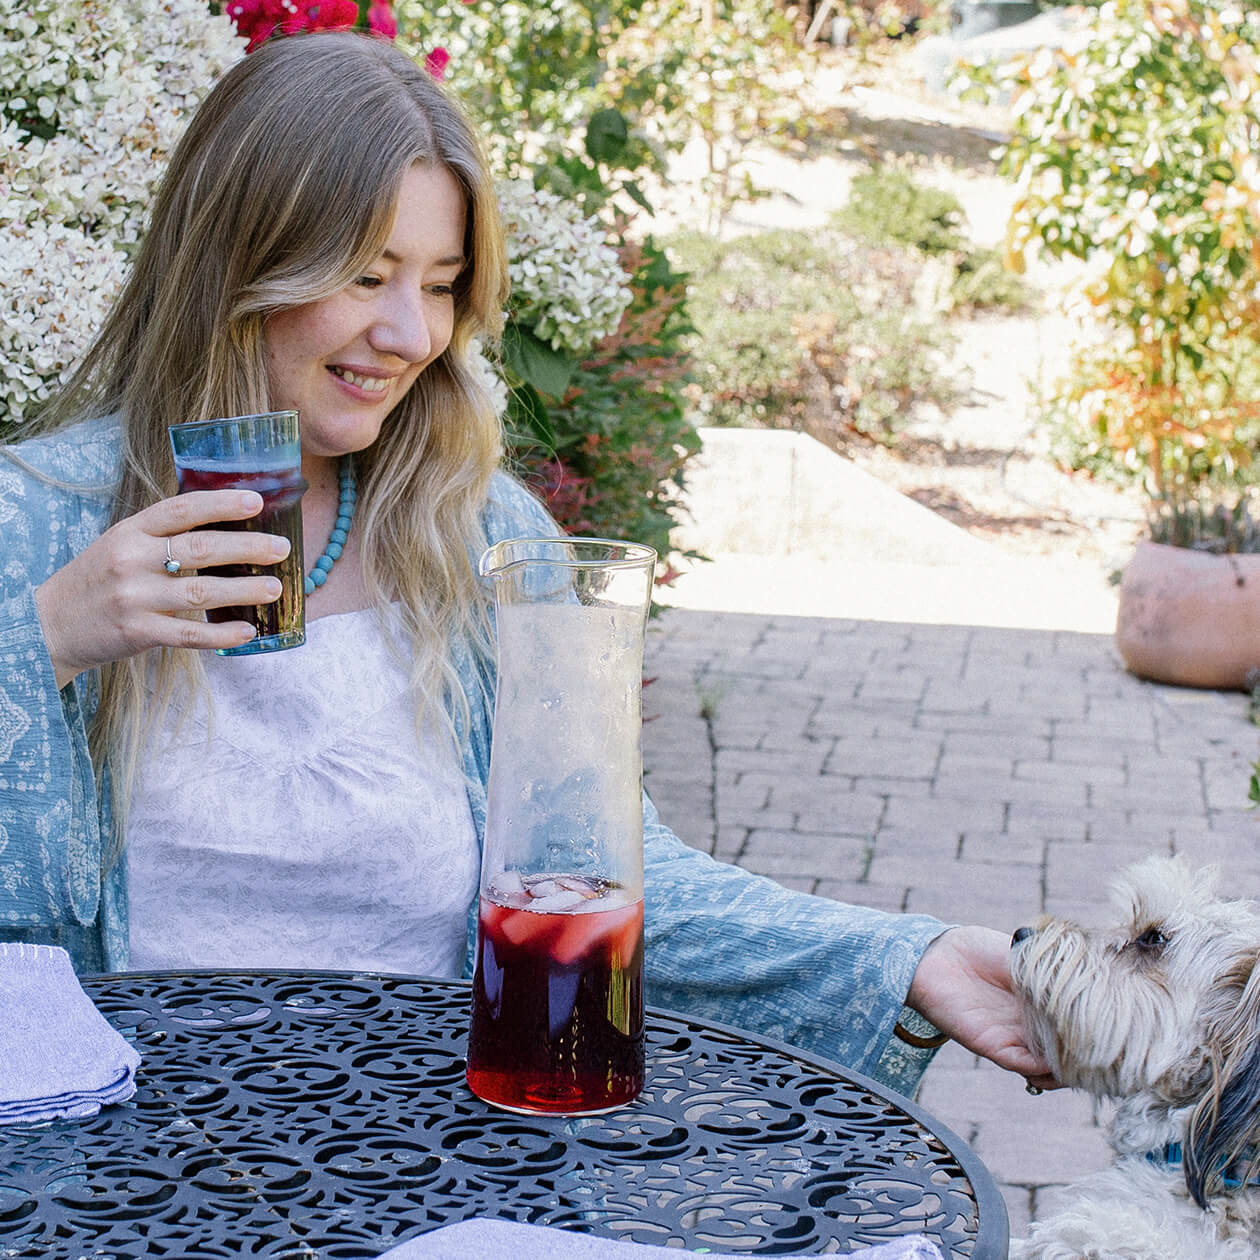 A young woman enjoys a herbal iced tea outdoors with her dog